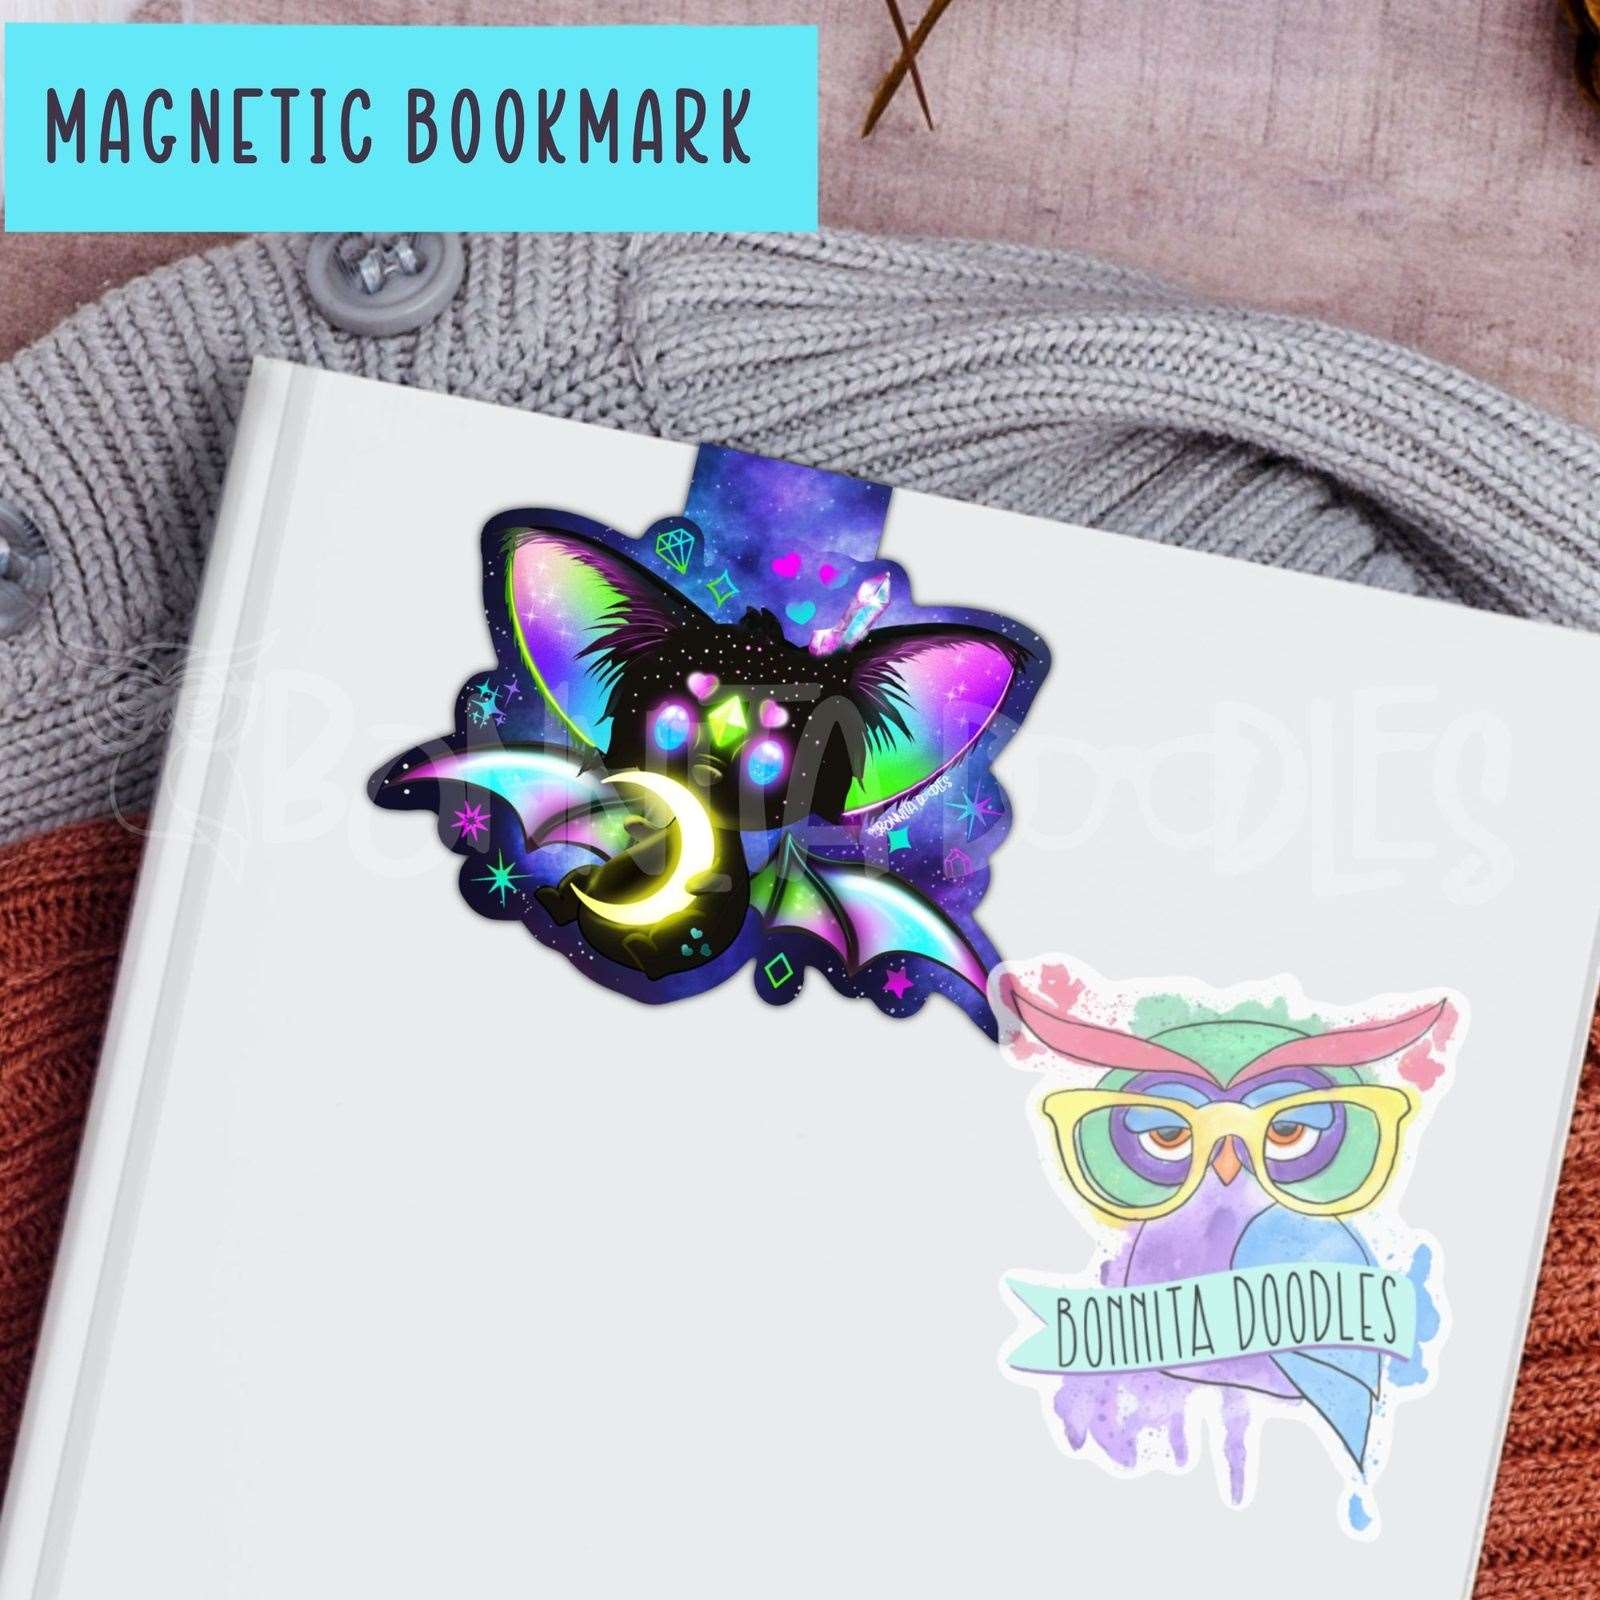 Galaxy bat magnetic bookmark - the perfect gift